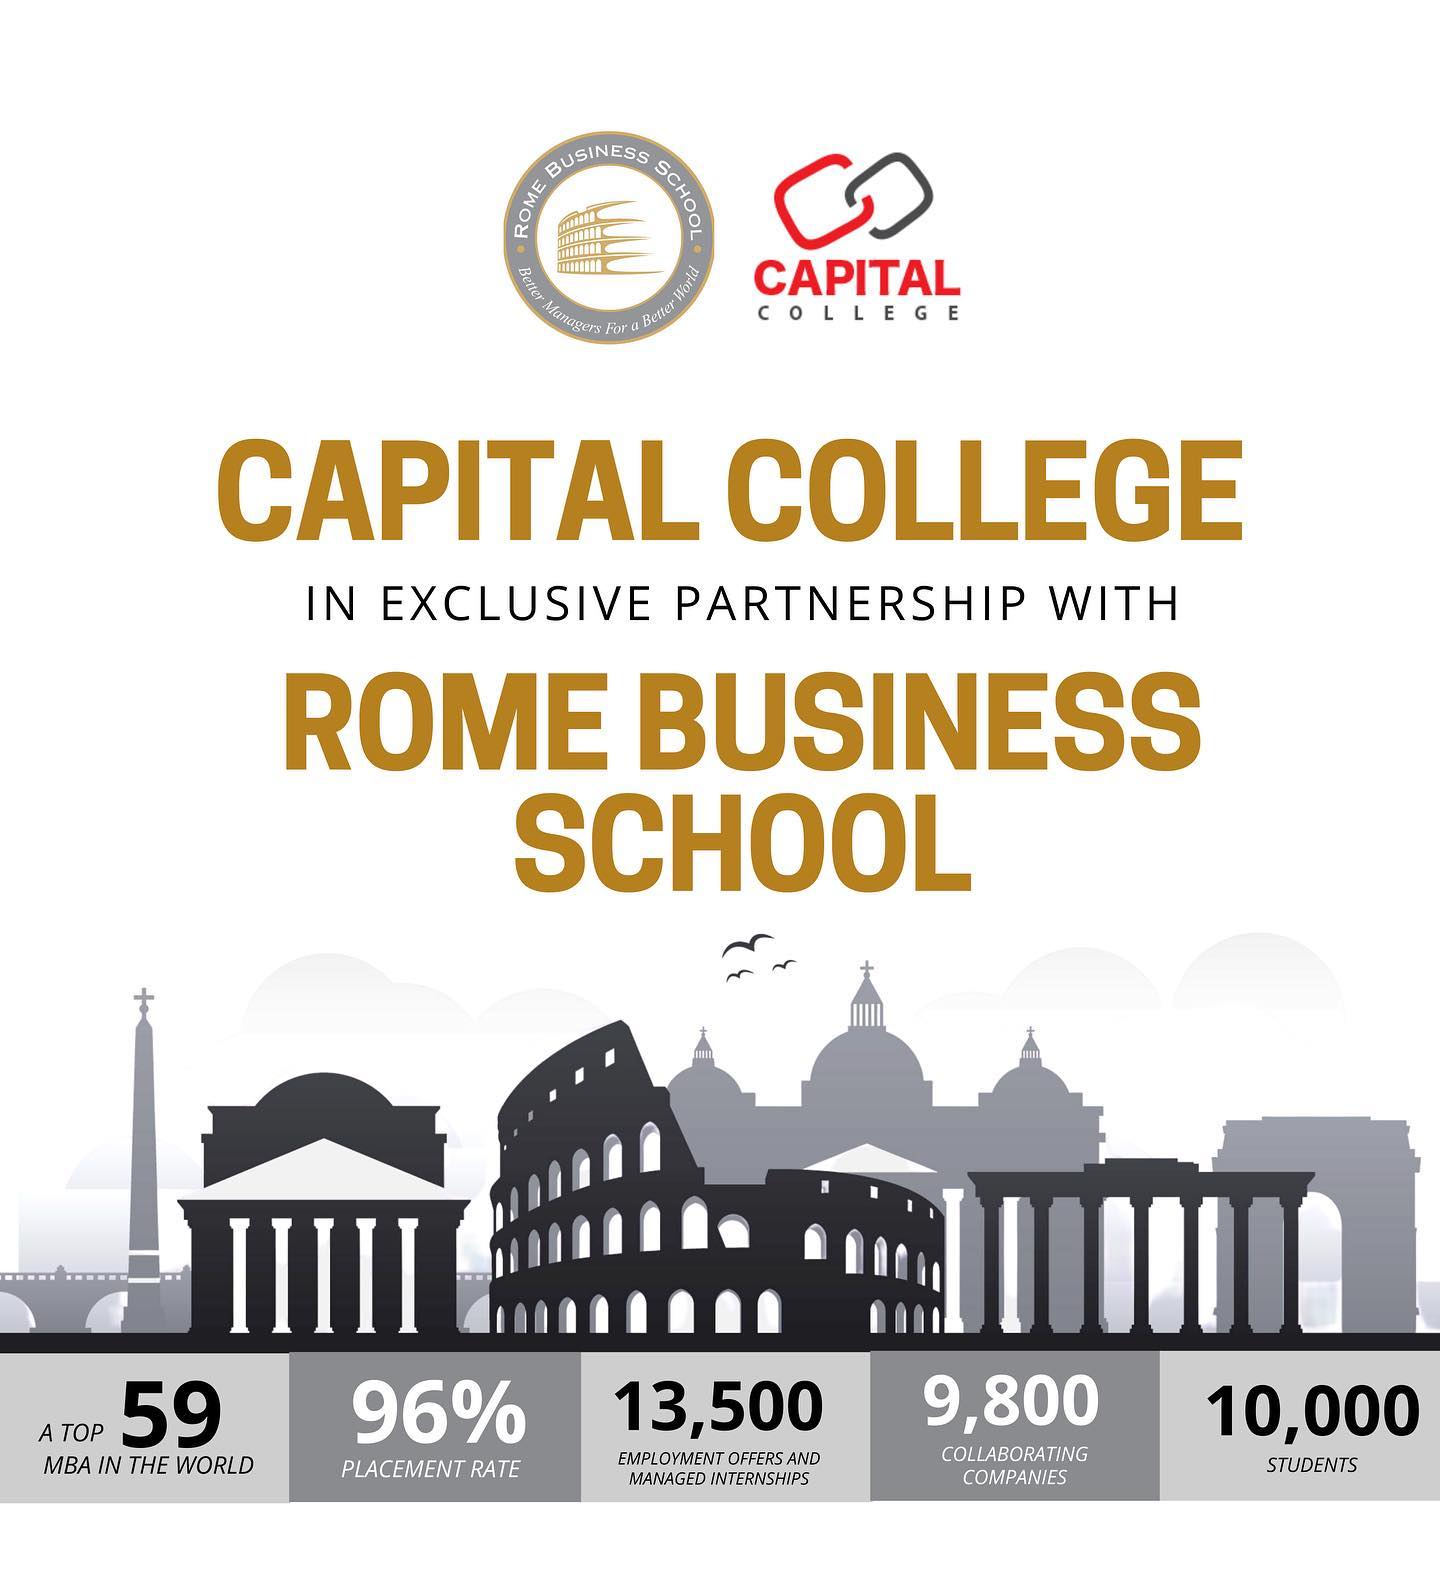 Rome Business School & Capital College form an Exclusive Partnership